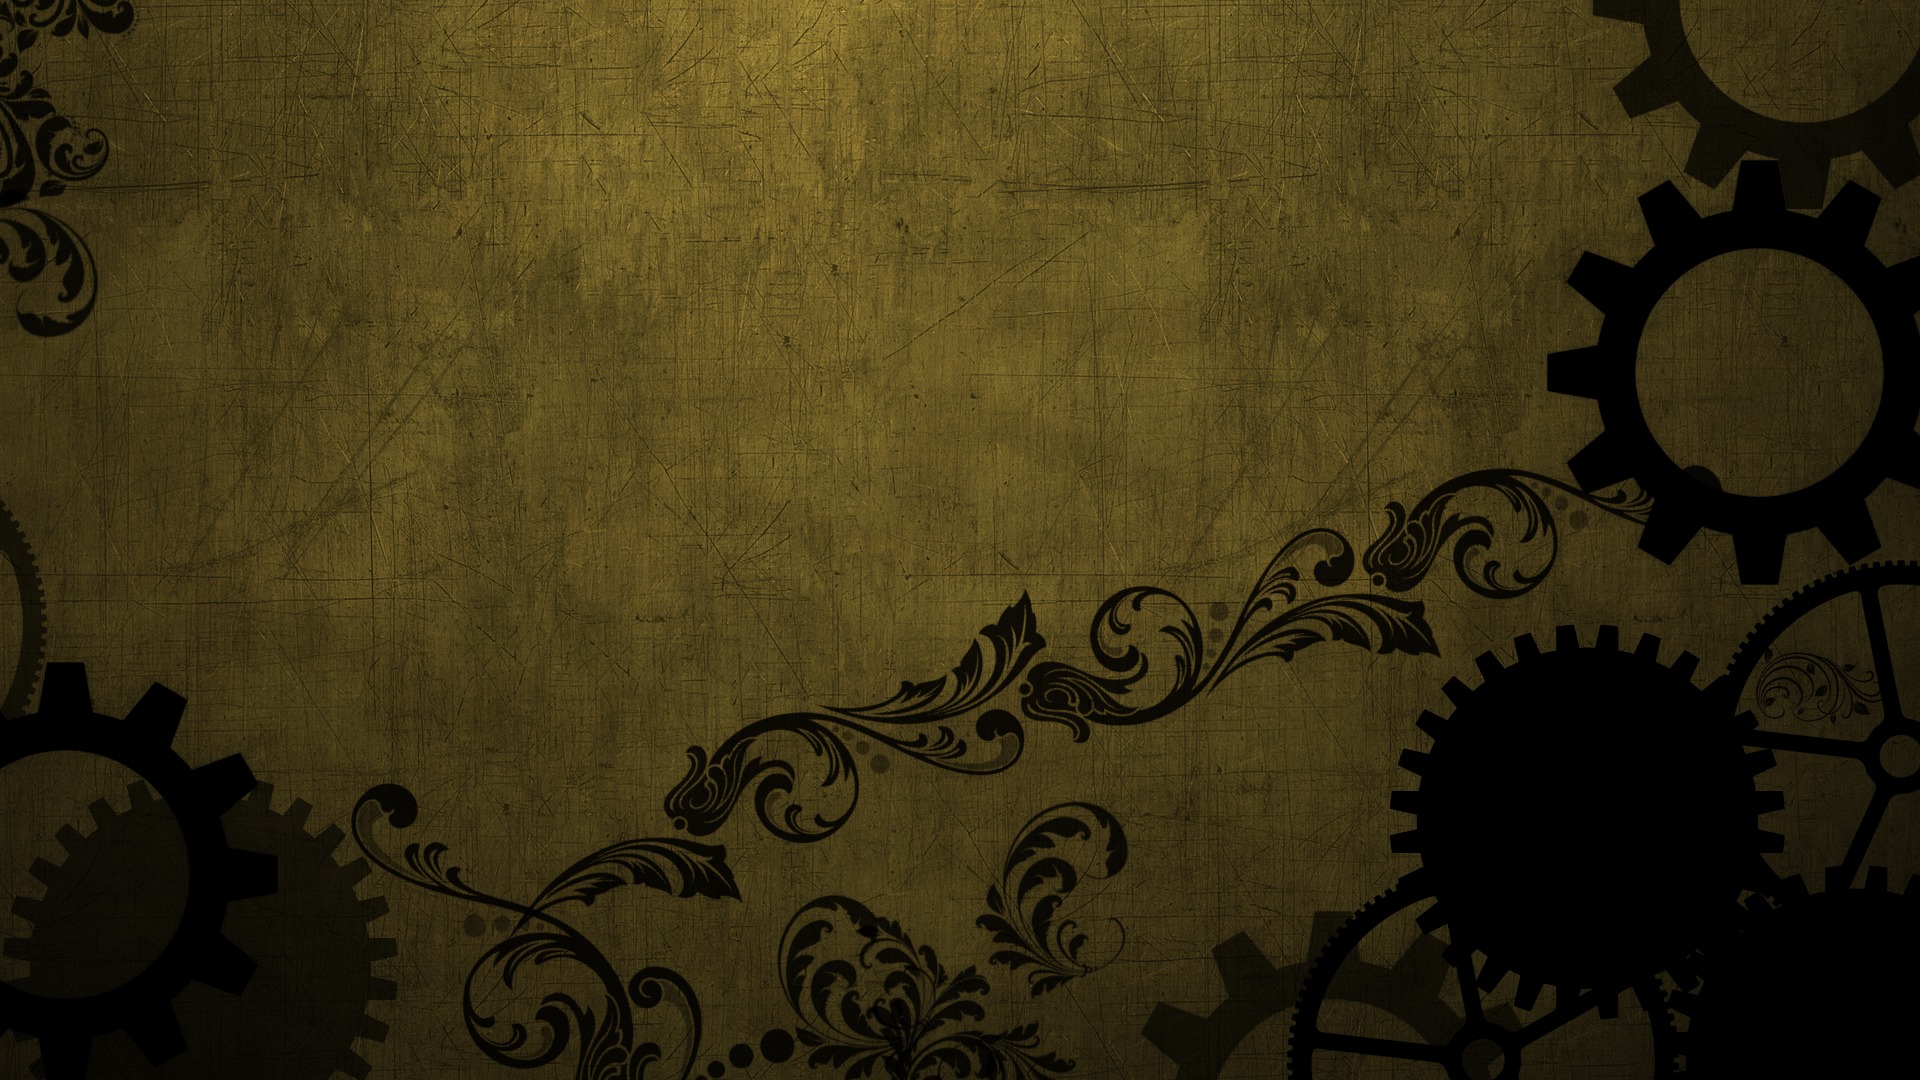  ventage vintage steampunk steampunk wallpapers style   download